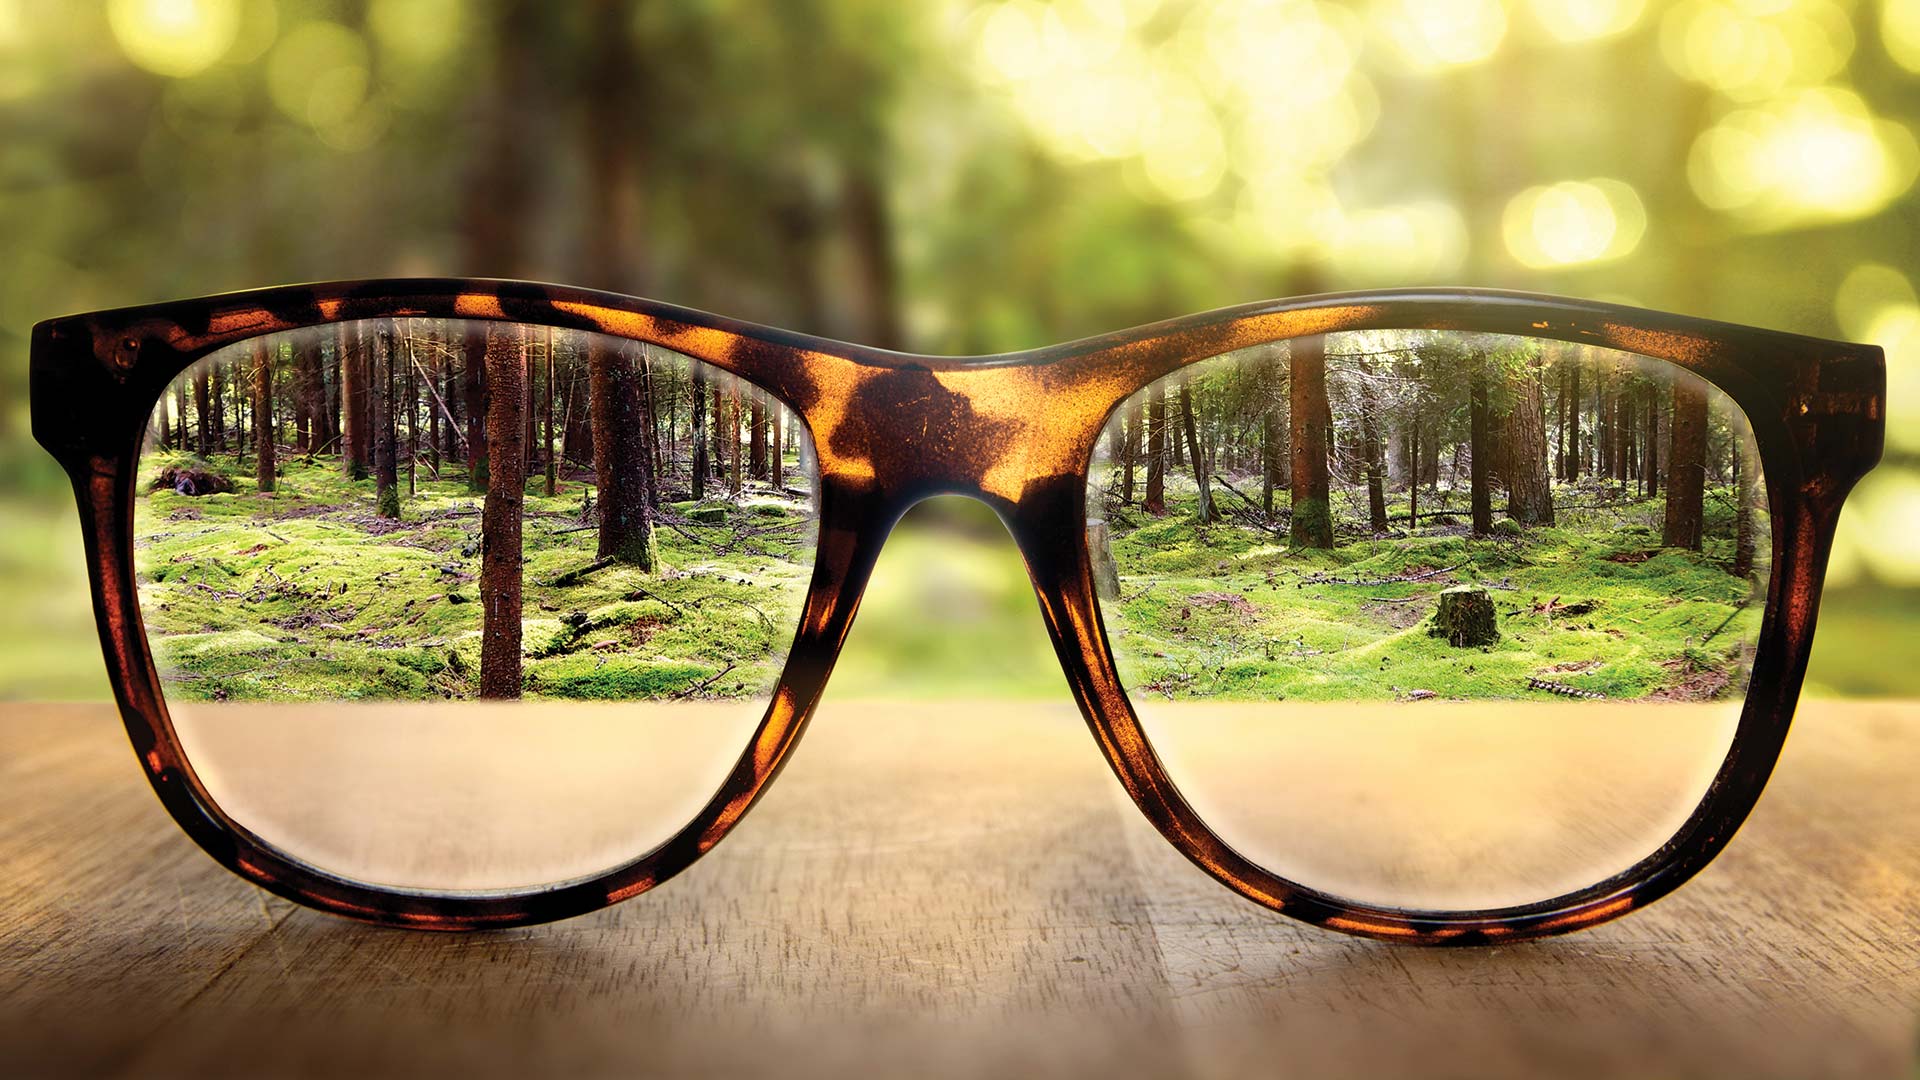 Looking through a pair of glasses revealing a clear view of a forest